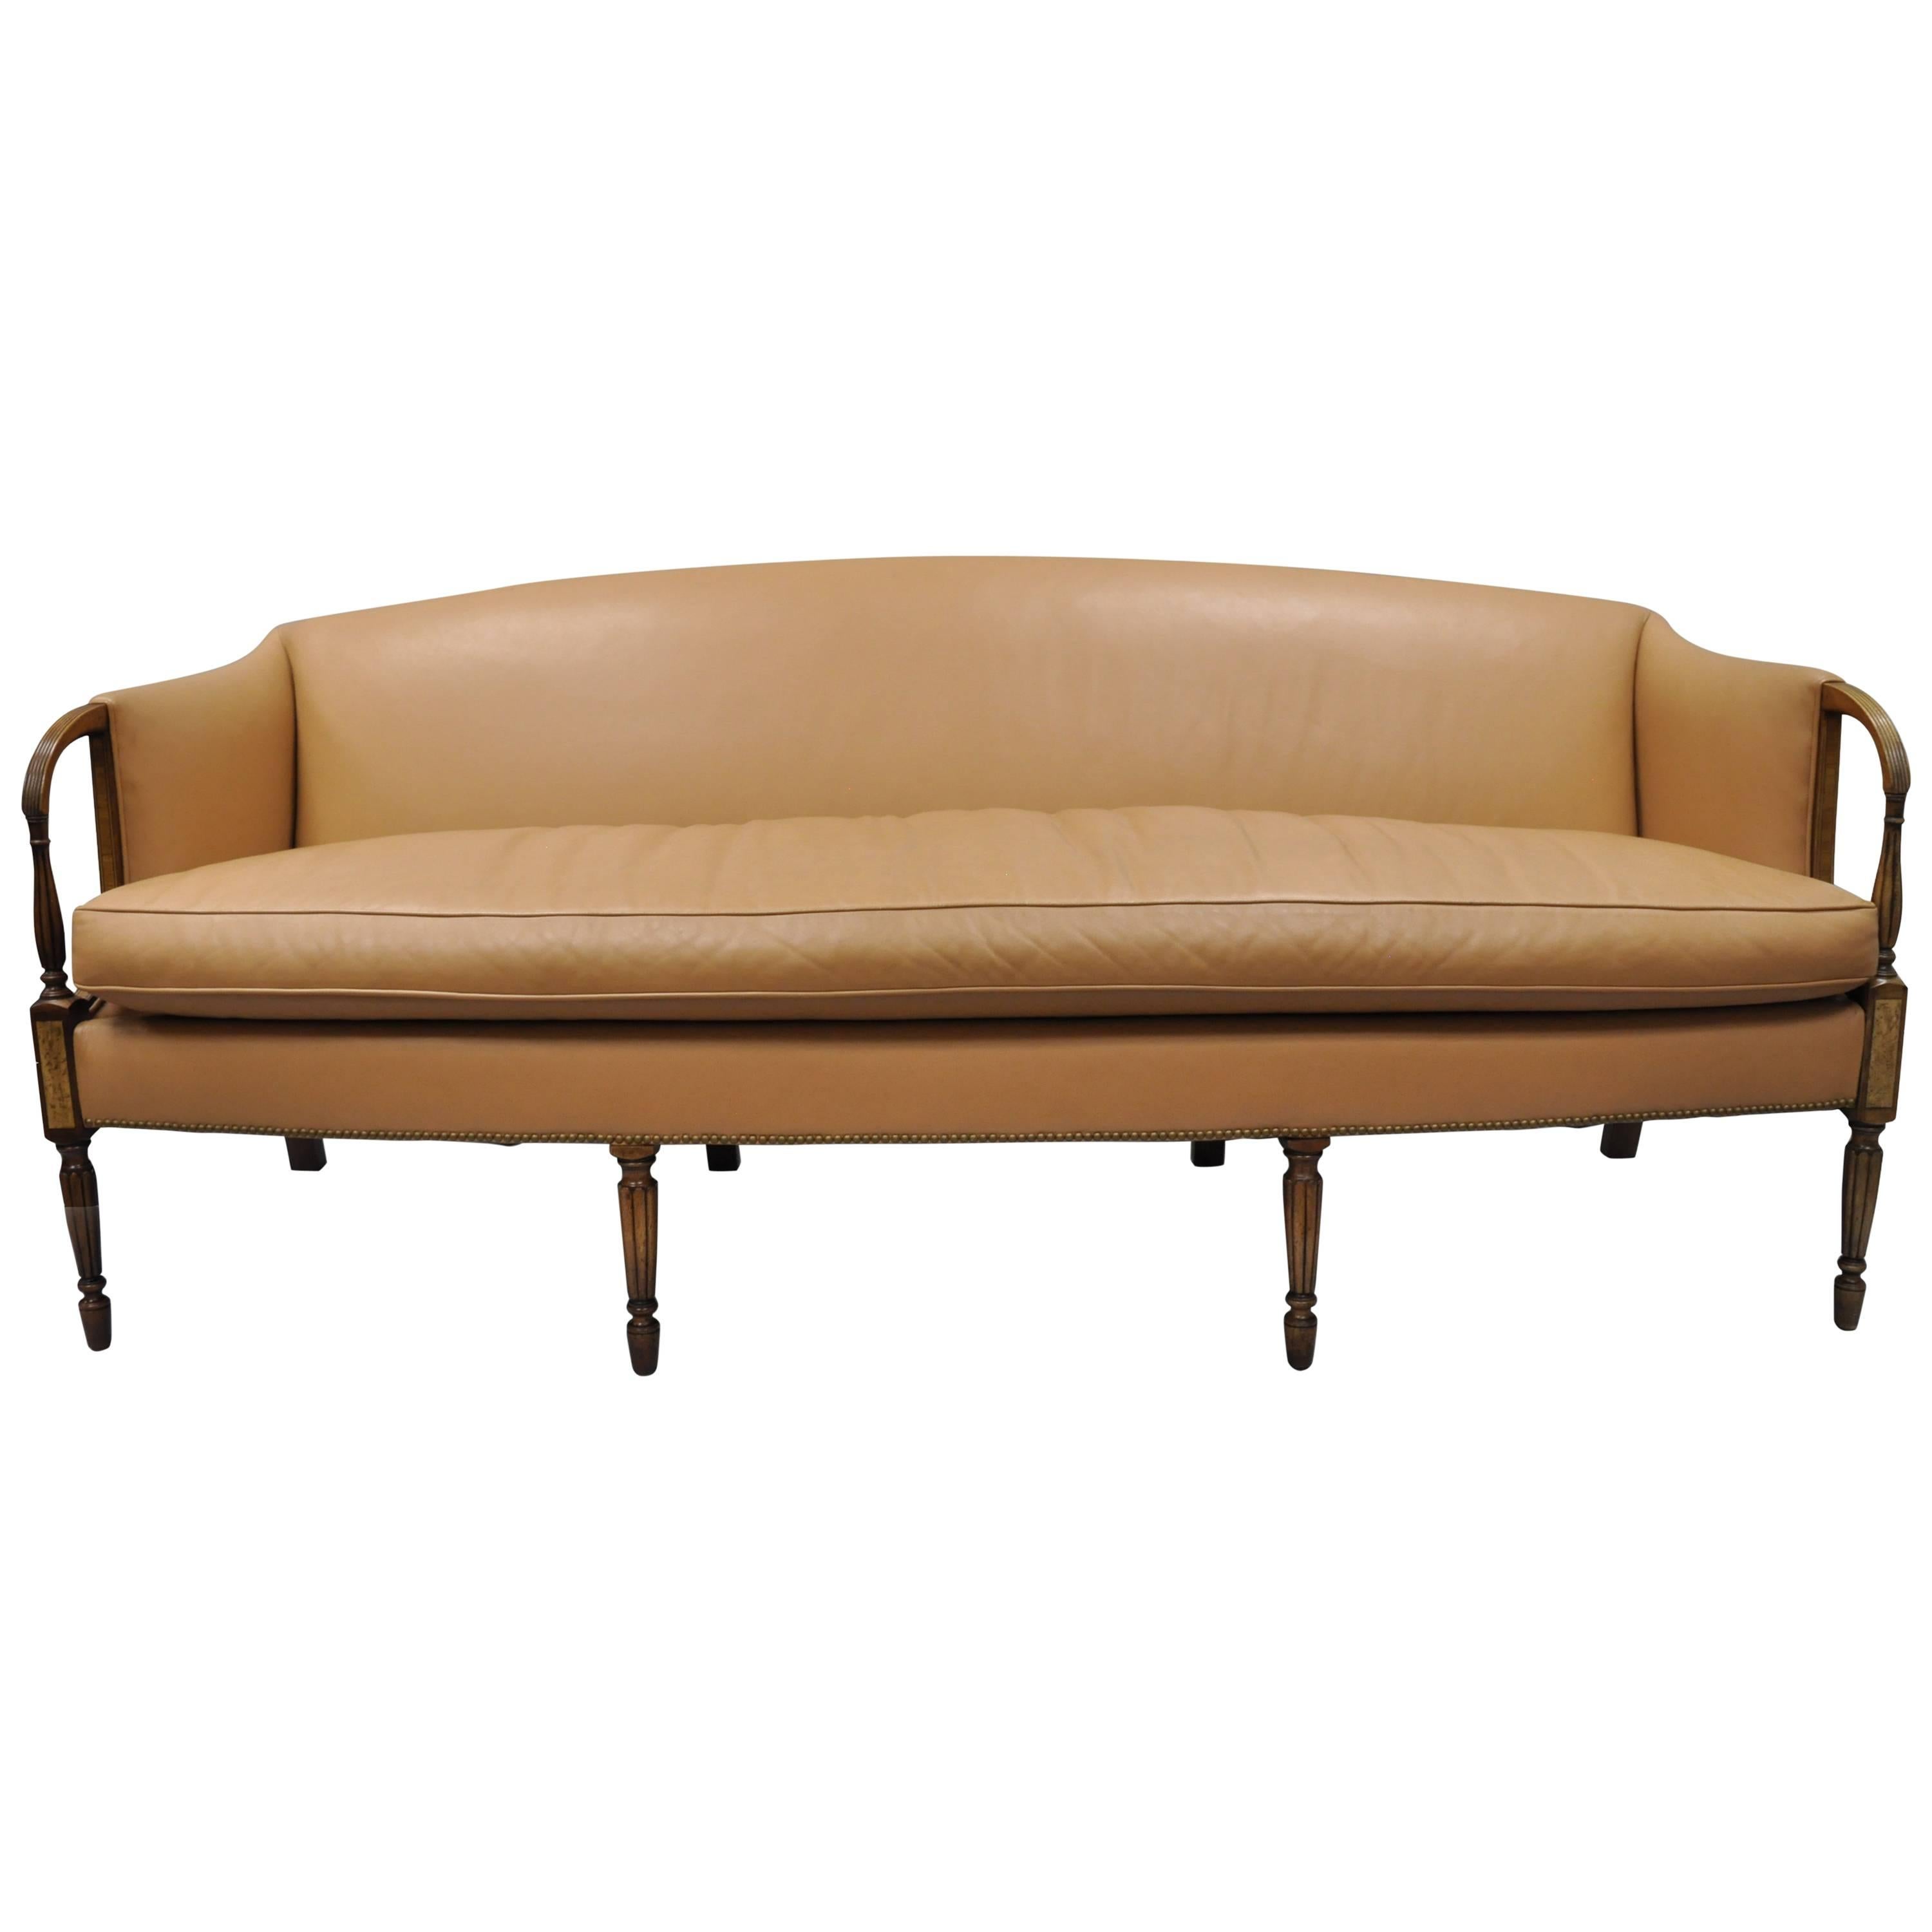 Sheraton Federal Style Caramel Tan Leather Upholstered Inlaid Sofa by Southwood  For Sale